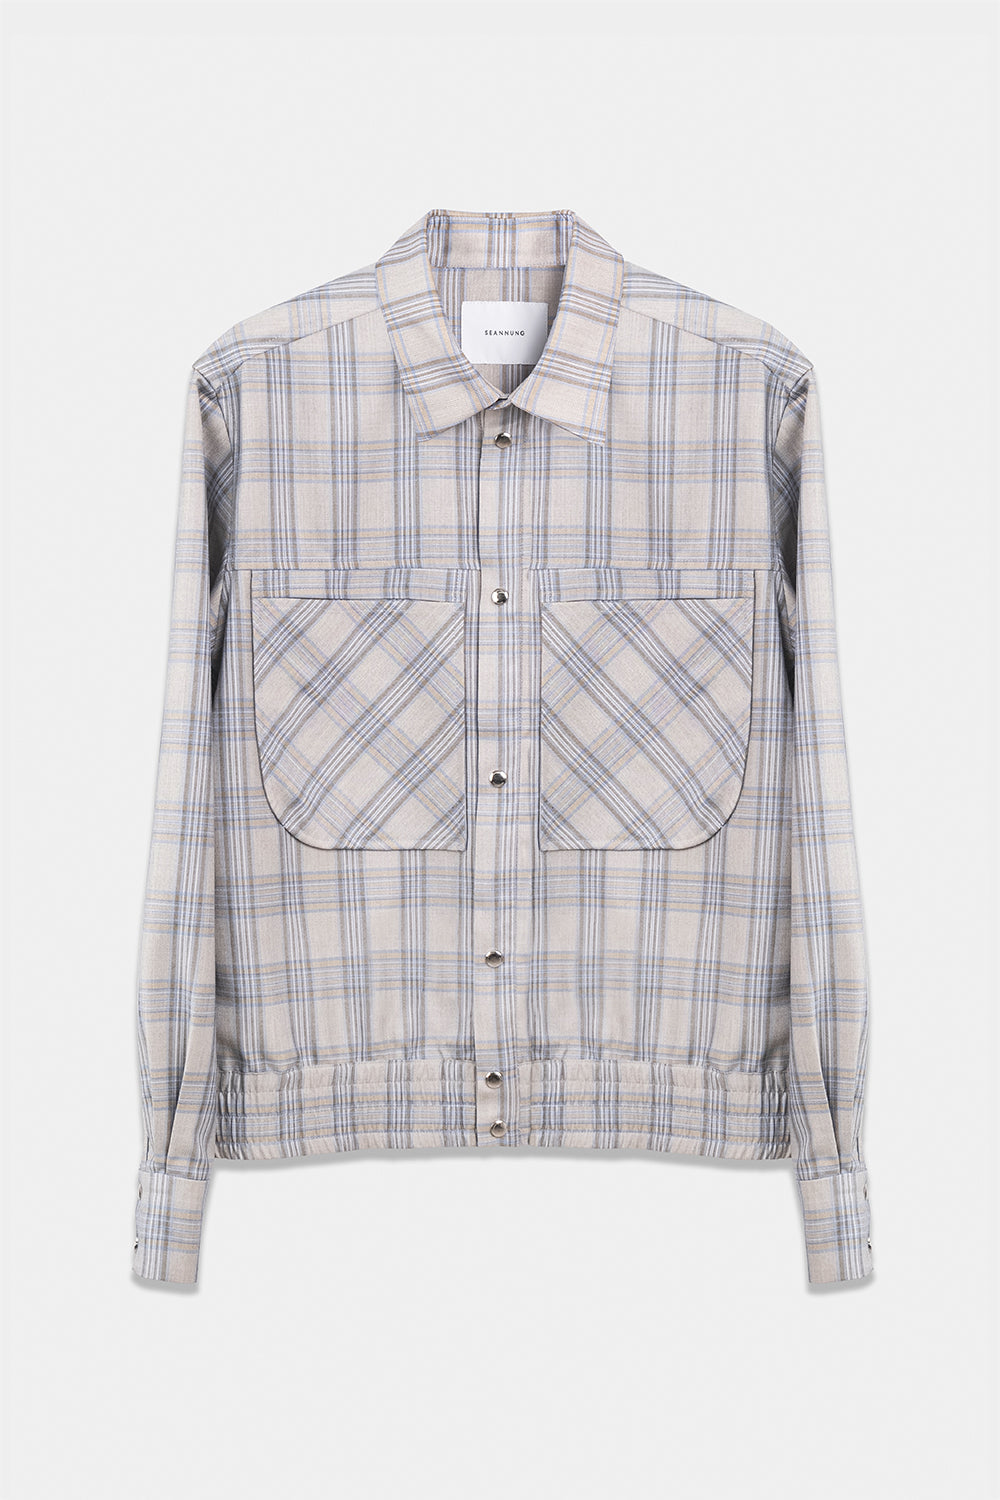 SEANNUNG - MEN- Double Pocketed Jacket Style Striped Shirt 格紋立體口袋外套式襯衫